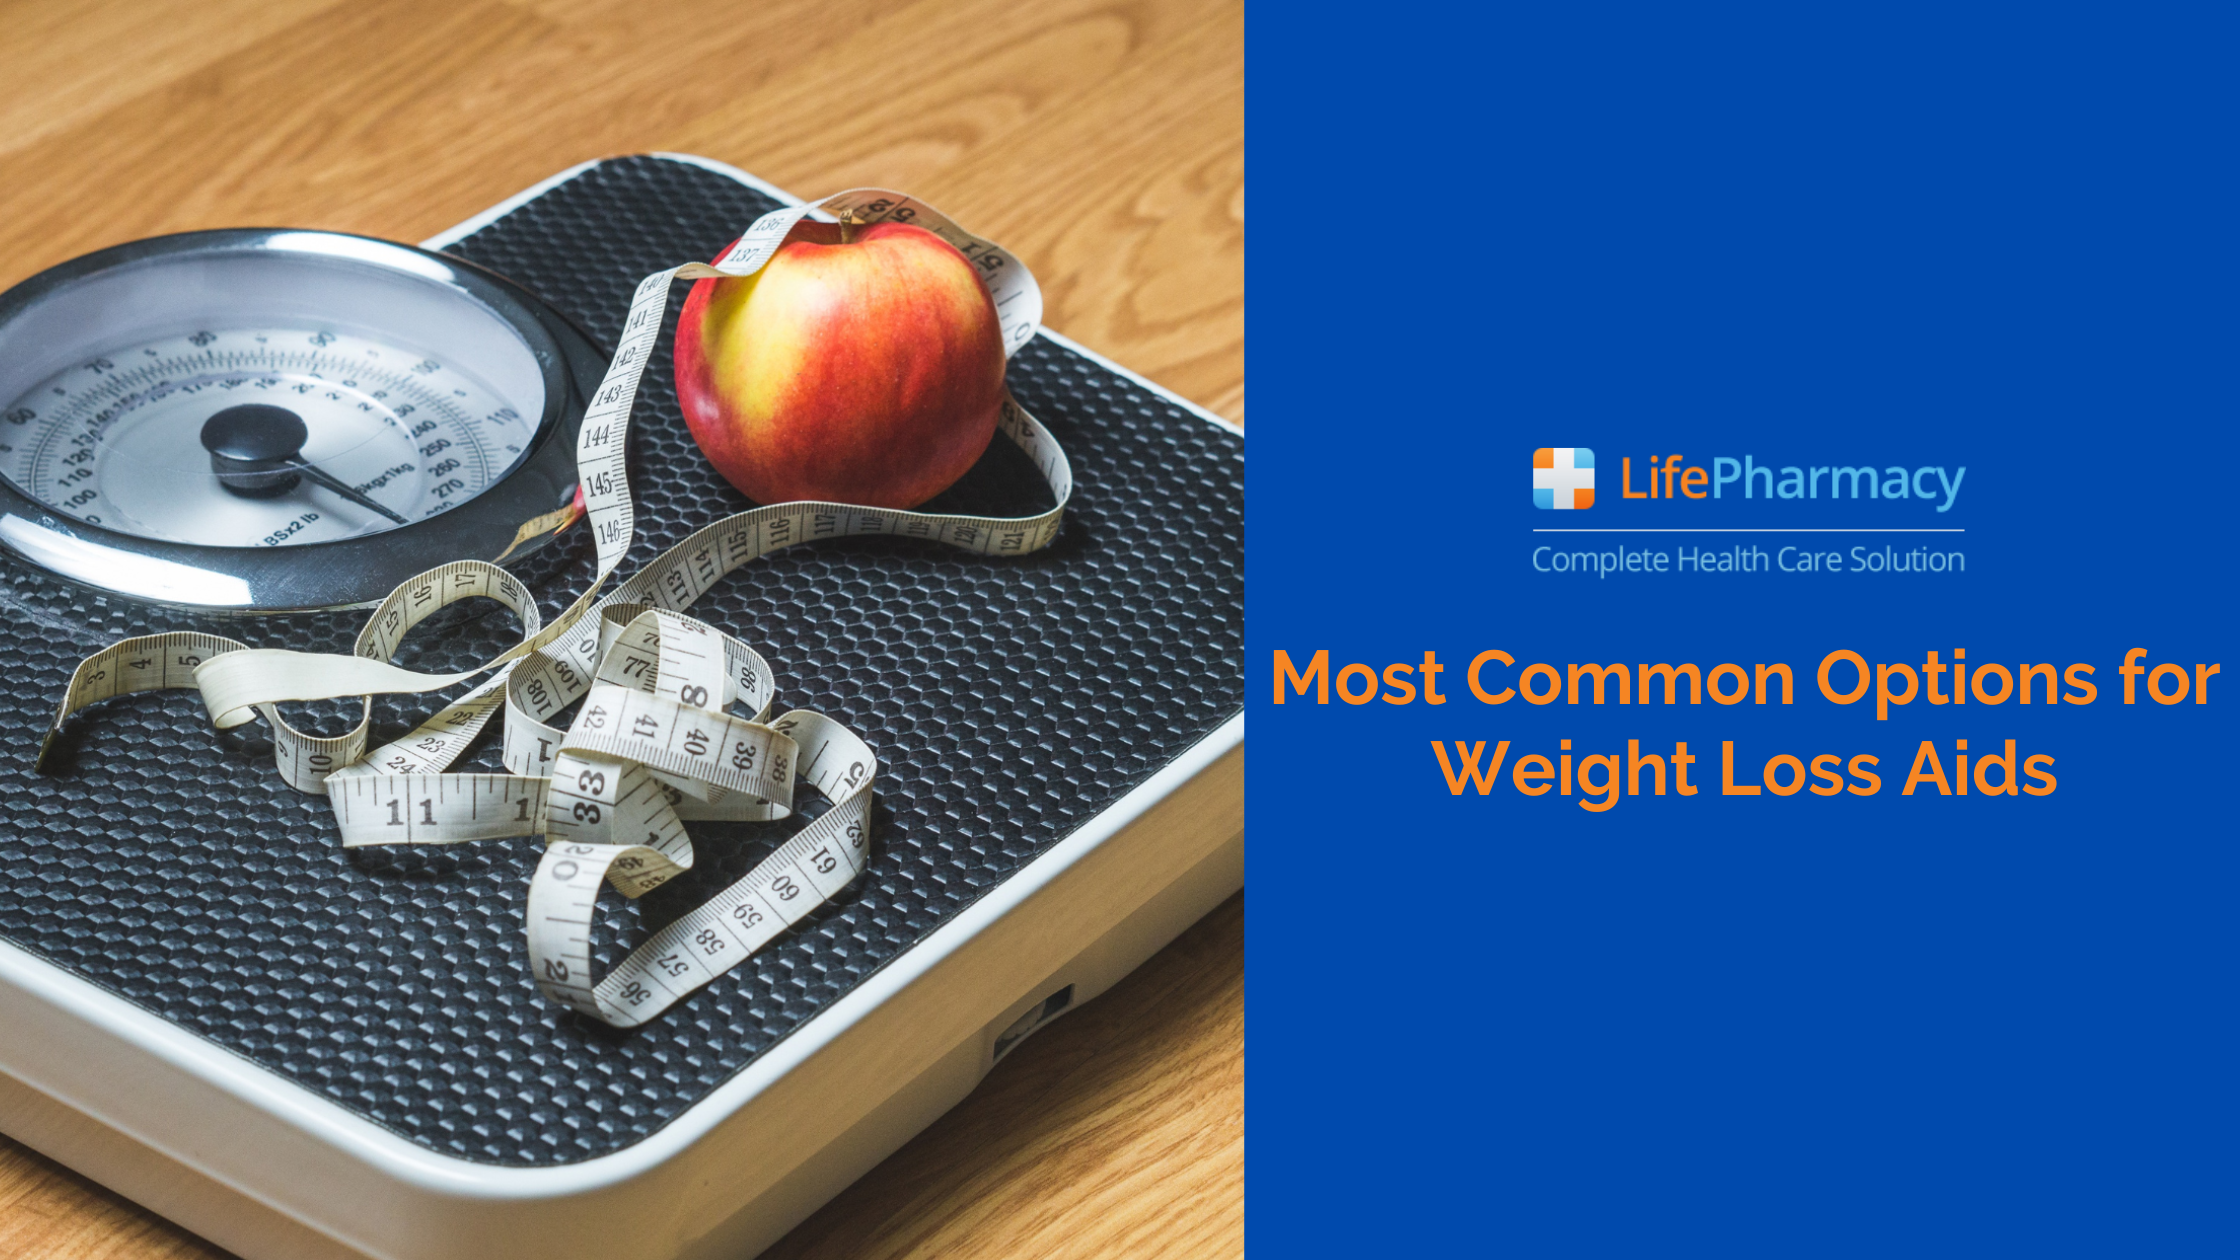 Most Common Options for Weight Loss Aids